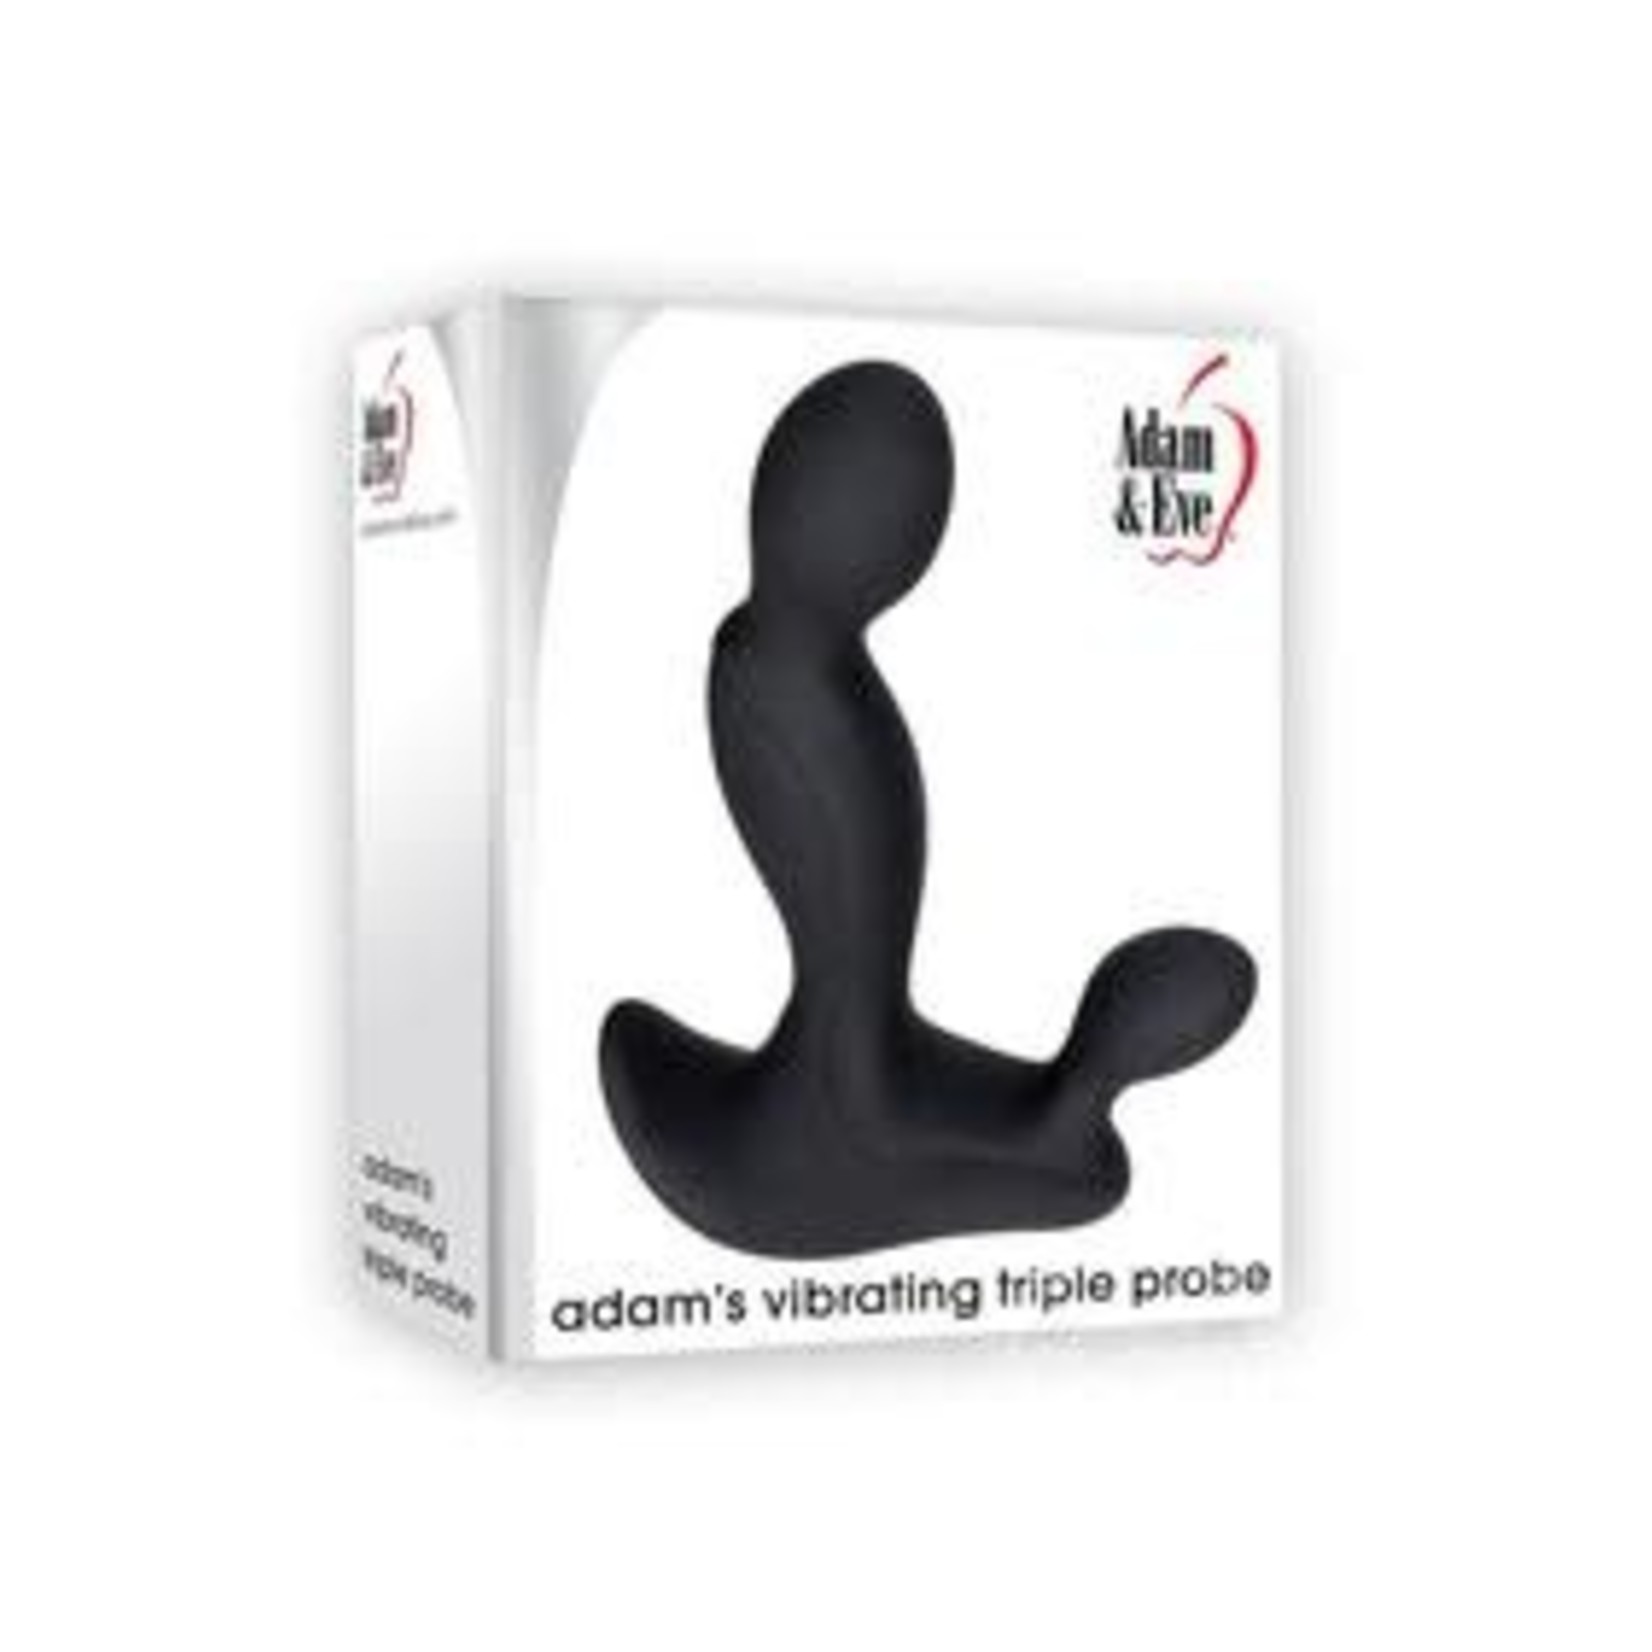 Adam & Eve Adam's Vibrating Triple Probe Rechargeable Silicone Prostate Massager - Black